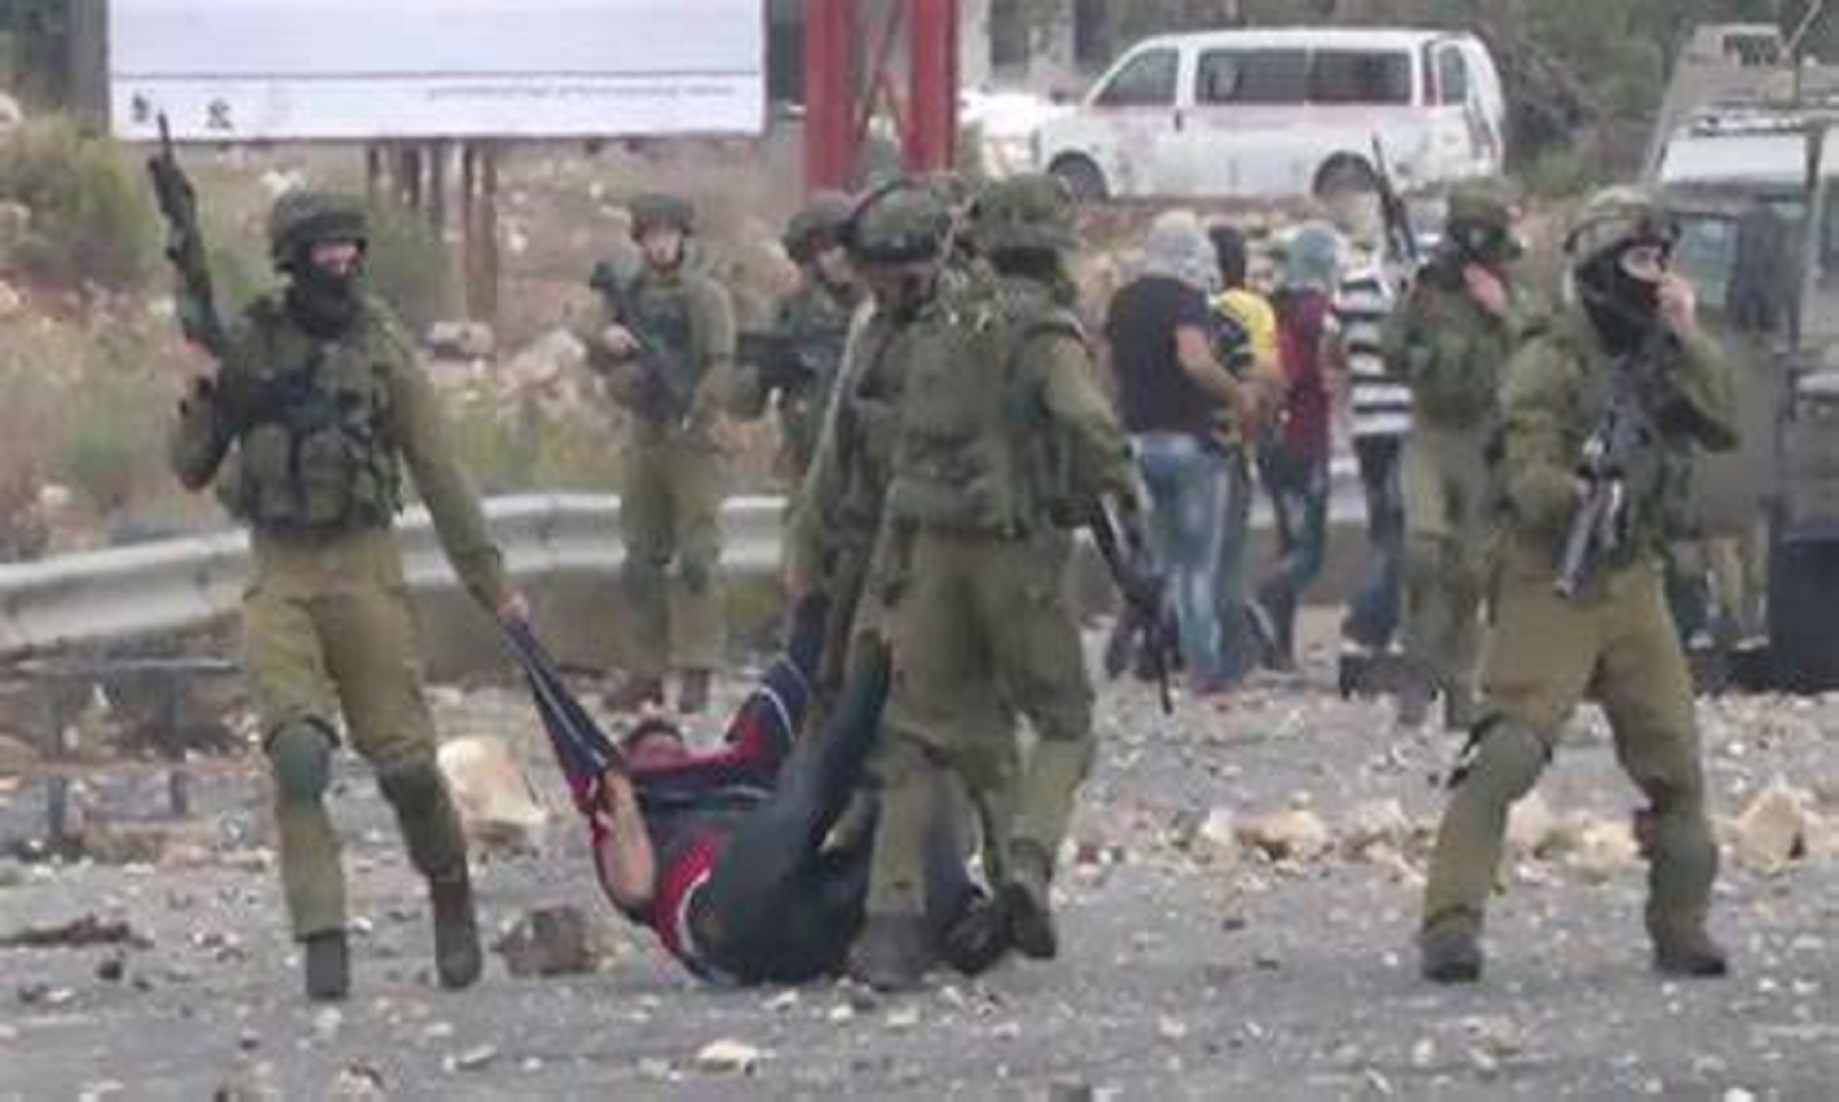 Palestine Condemns Israel’s “Green Light” To Shoot Palestinian Stone Throwers